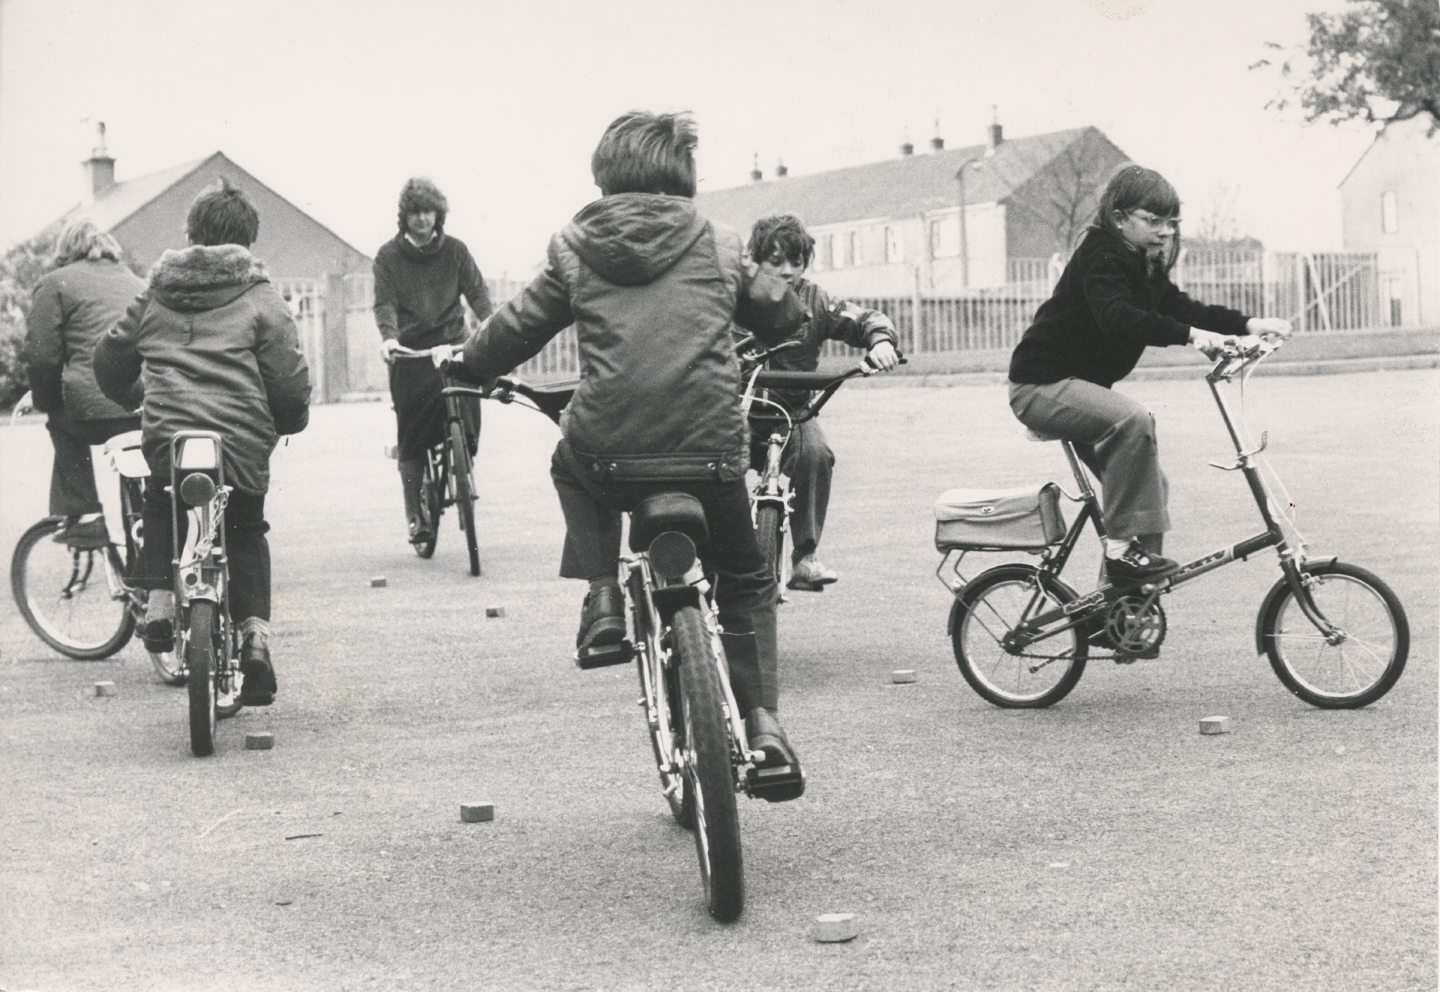 Youngsters improving their cycling skills by negotiating obstacles at Aberdeen in 1979 on the Raleigh Chopper.